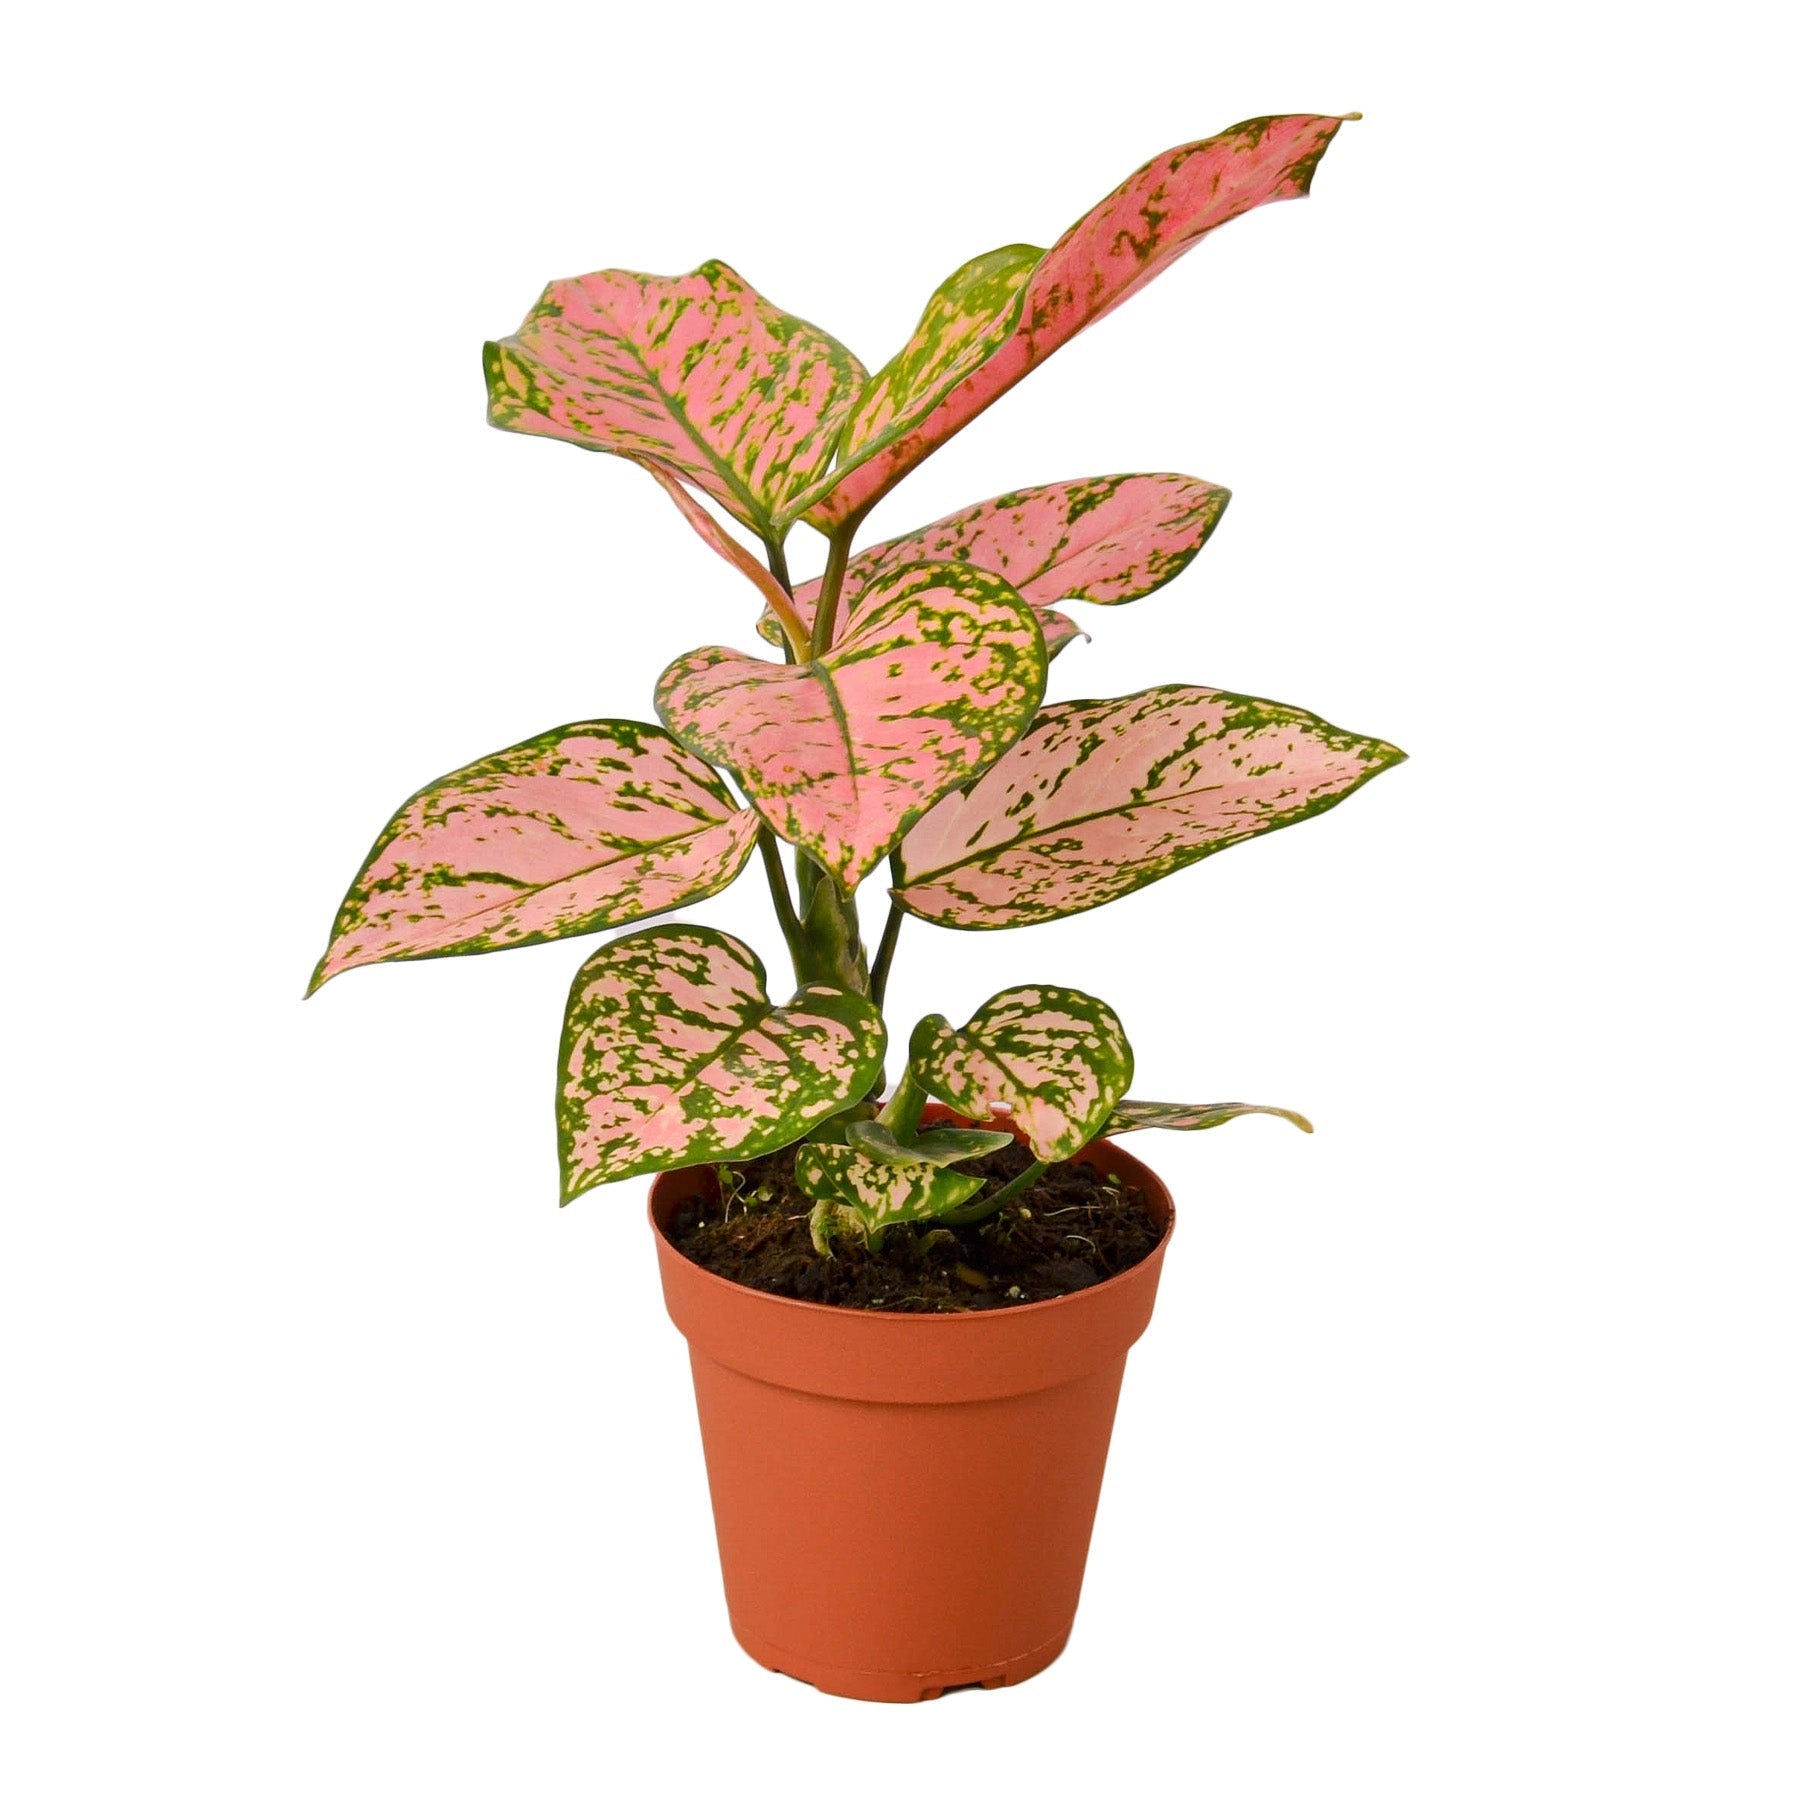 Chinese Evergreen 'Lady Valentine' - 4" Pot - NURSERY POT ONLY - One Beleaf Away Plant Studio